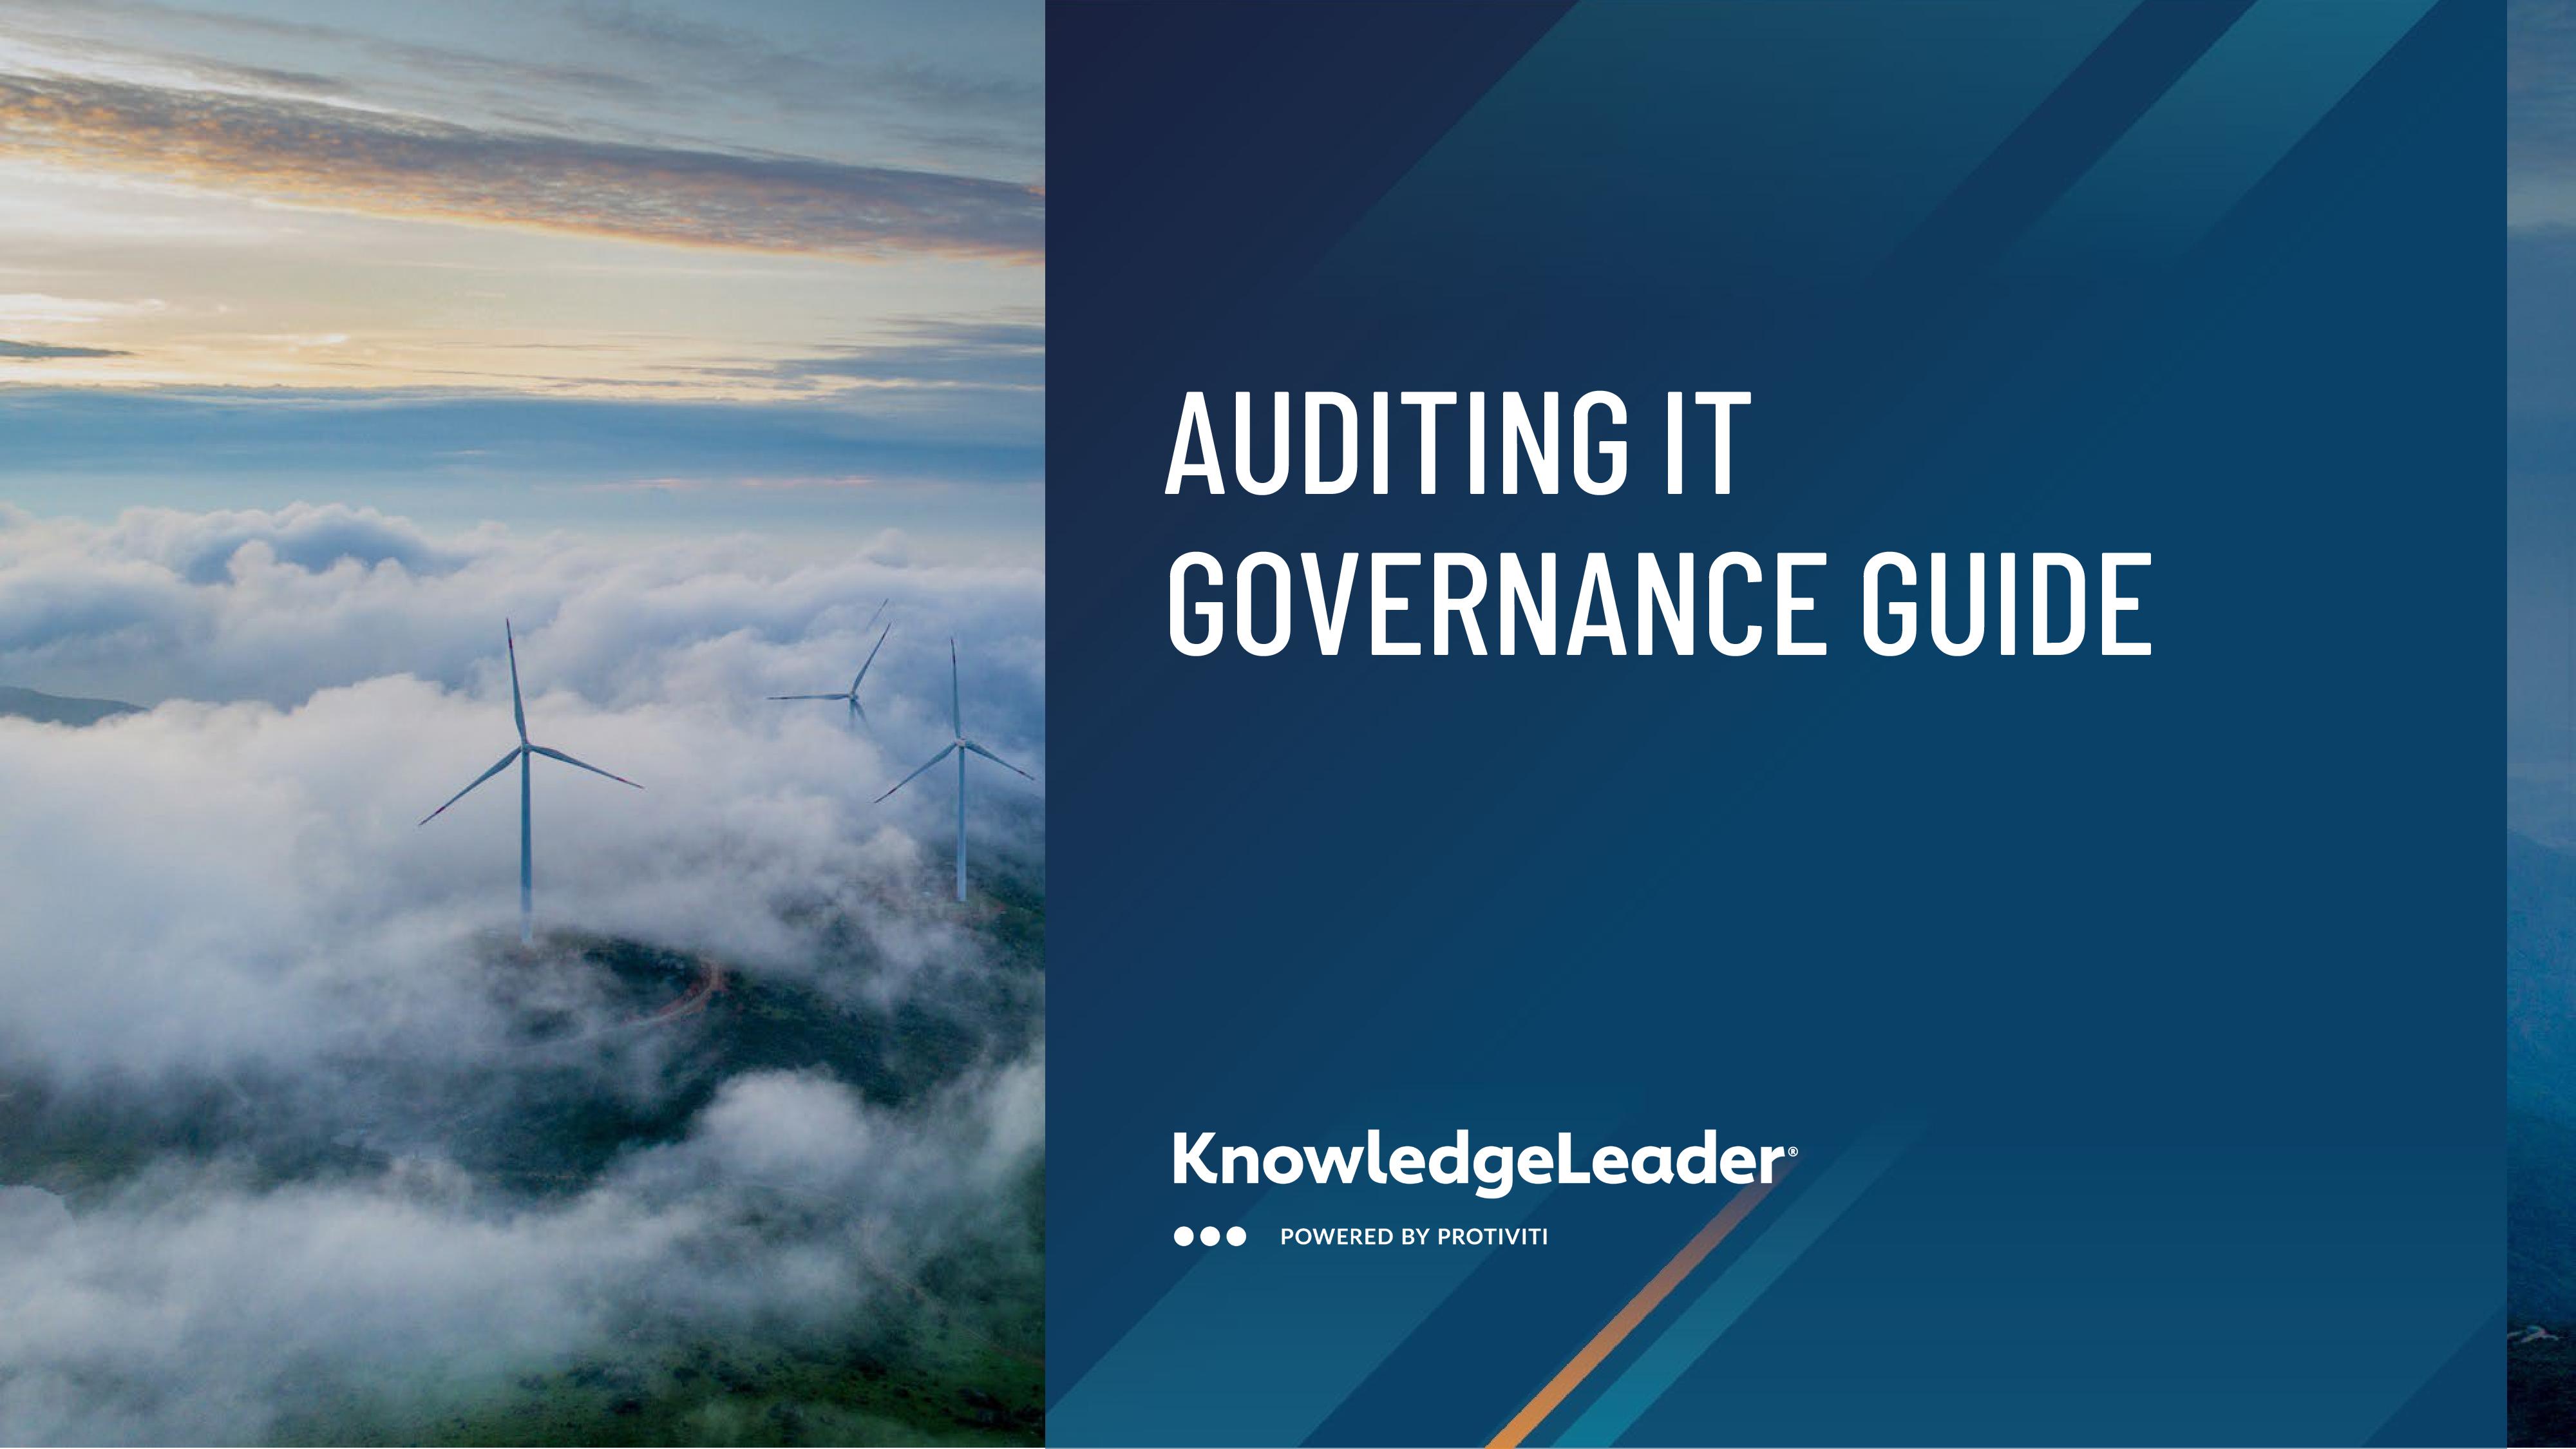 screenshot of the first page of Auditing IT Governance Guide